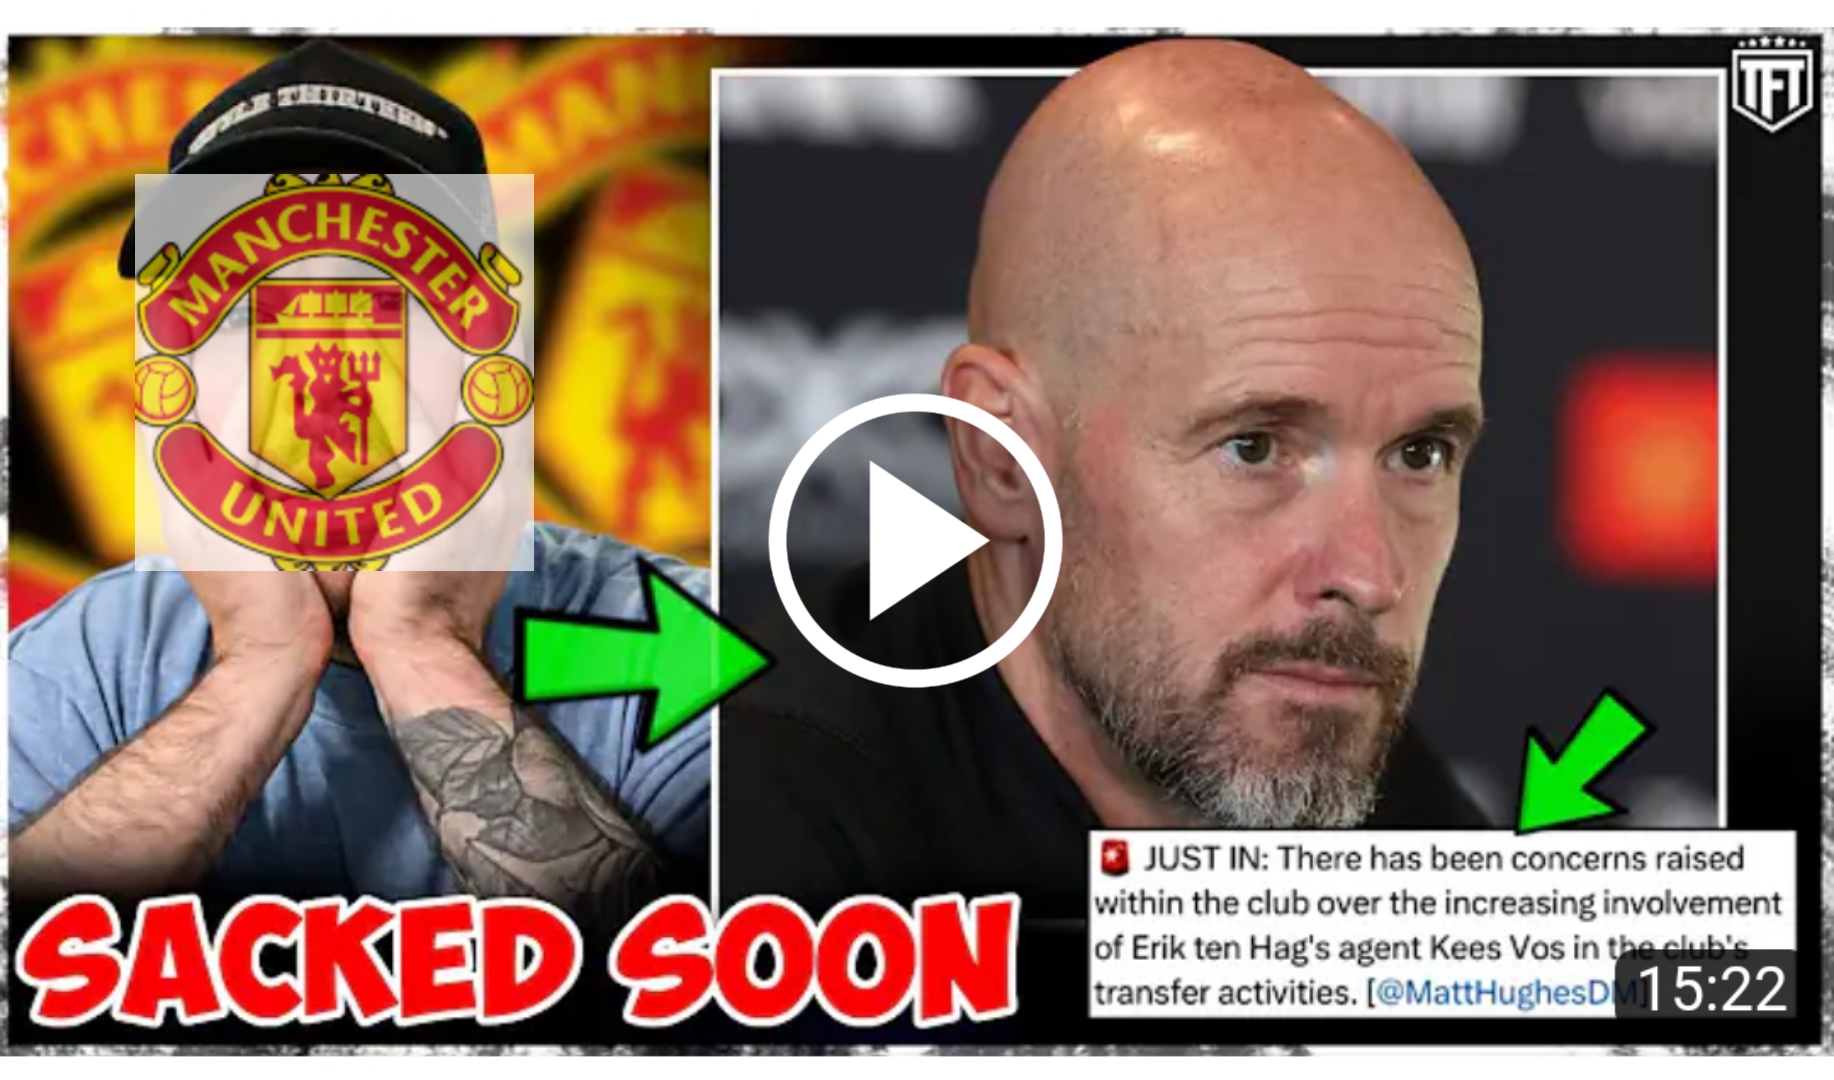 Man United superstar backs united chiefs as they take shock decision to SACK Erik Ten Hag as he has reportedly lost Man United dressing room after player ‘storms out’ before next match clash